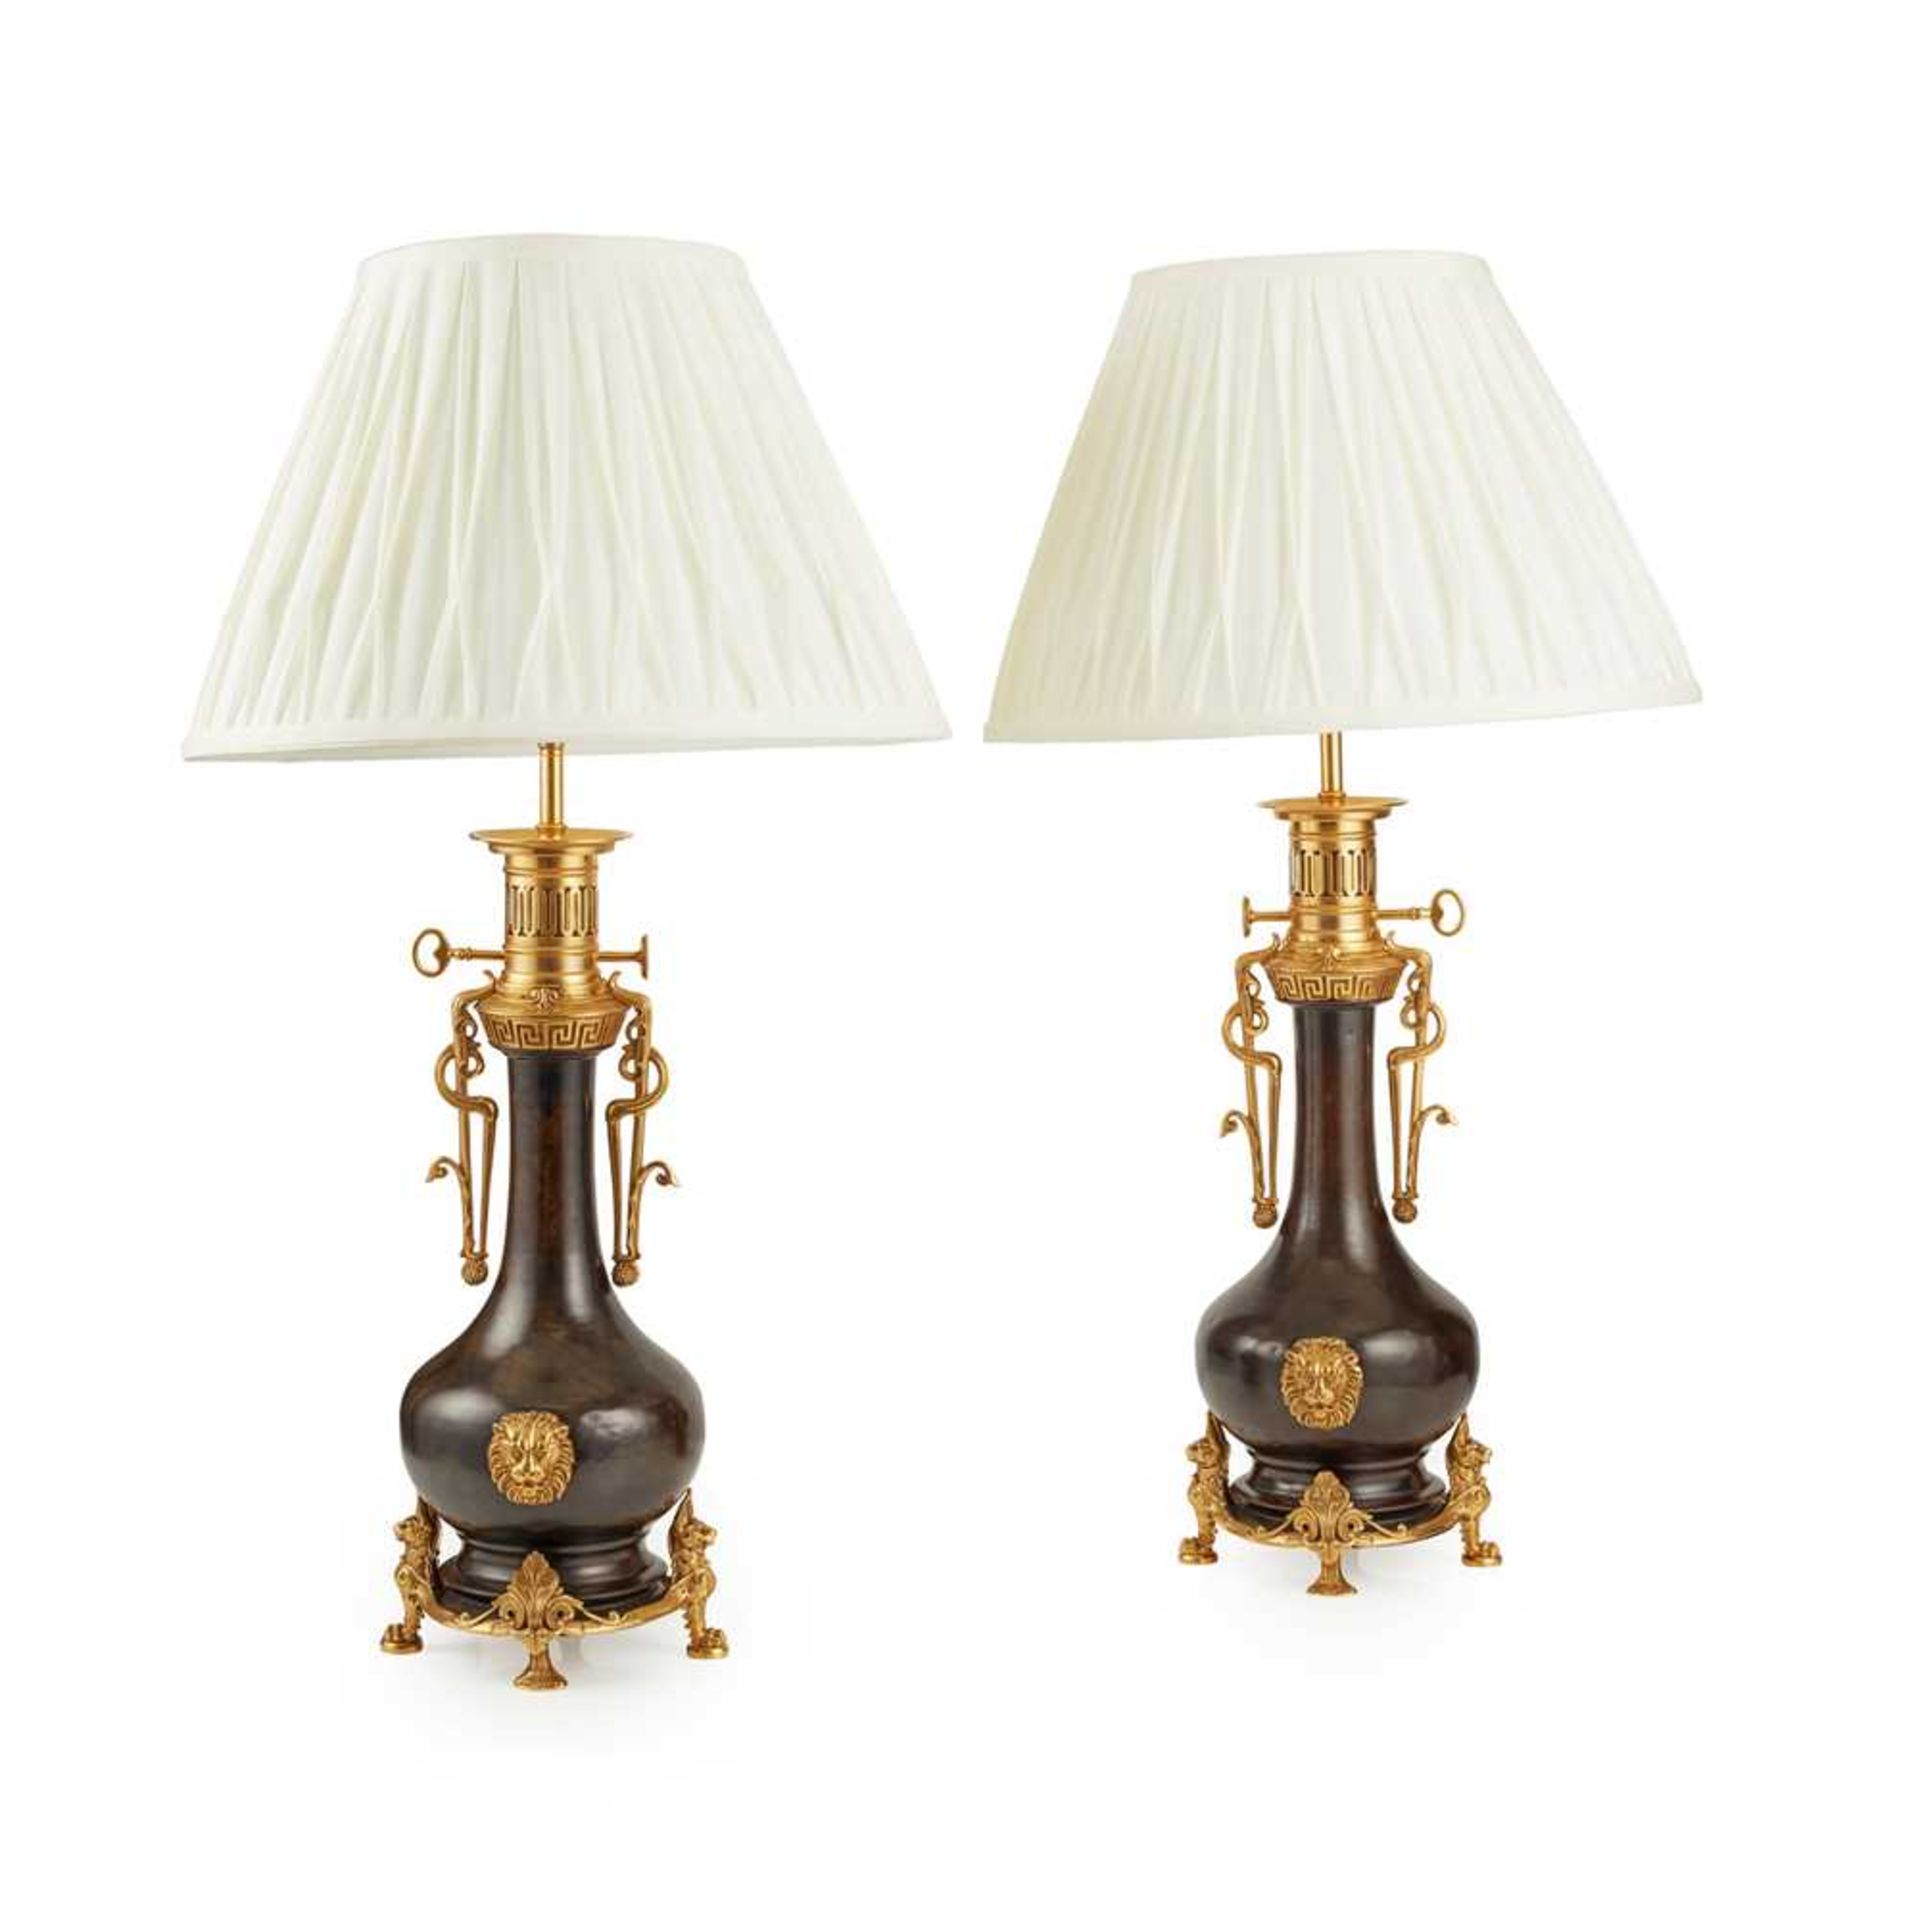 PAIR OF FRENCH GILT AND PATINATED BRONZE MODERATOR LAMPS 19TH CENTURY